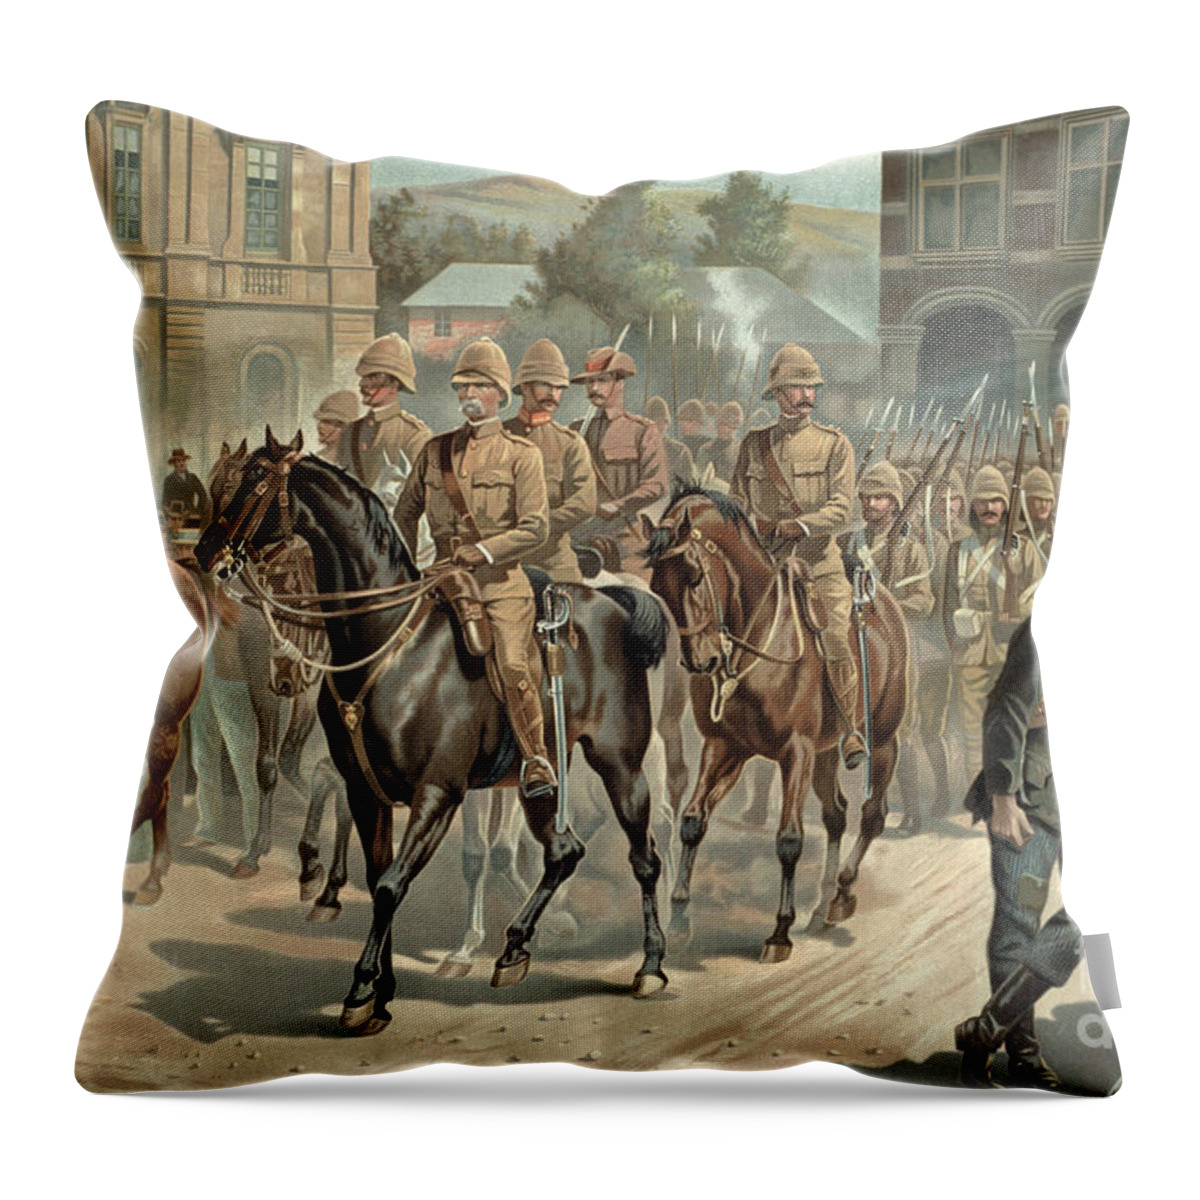 The Boer War Throw Pillow featuring the painting Lord Roberts Entry into Pretoria by Richard Caton Woodville